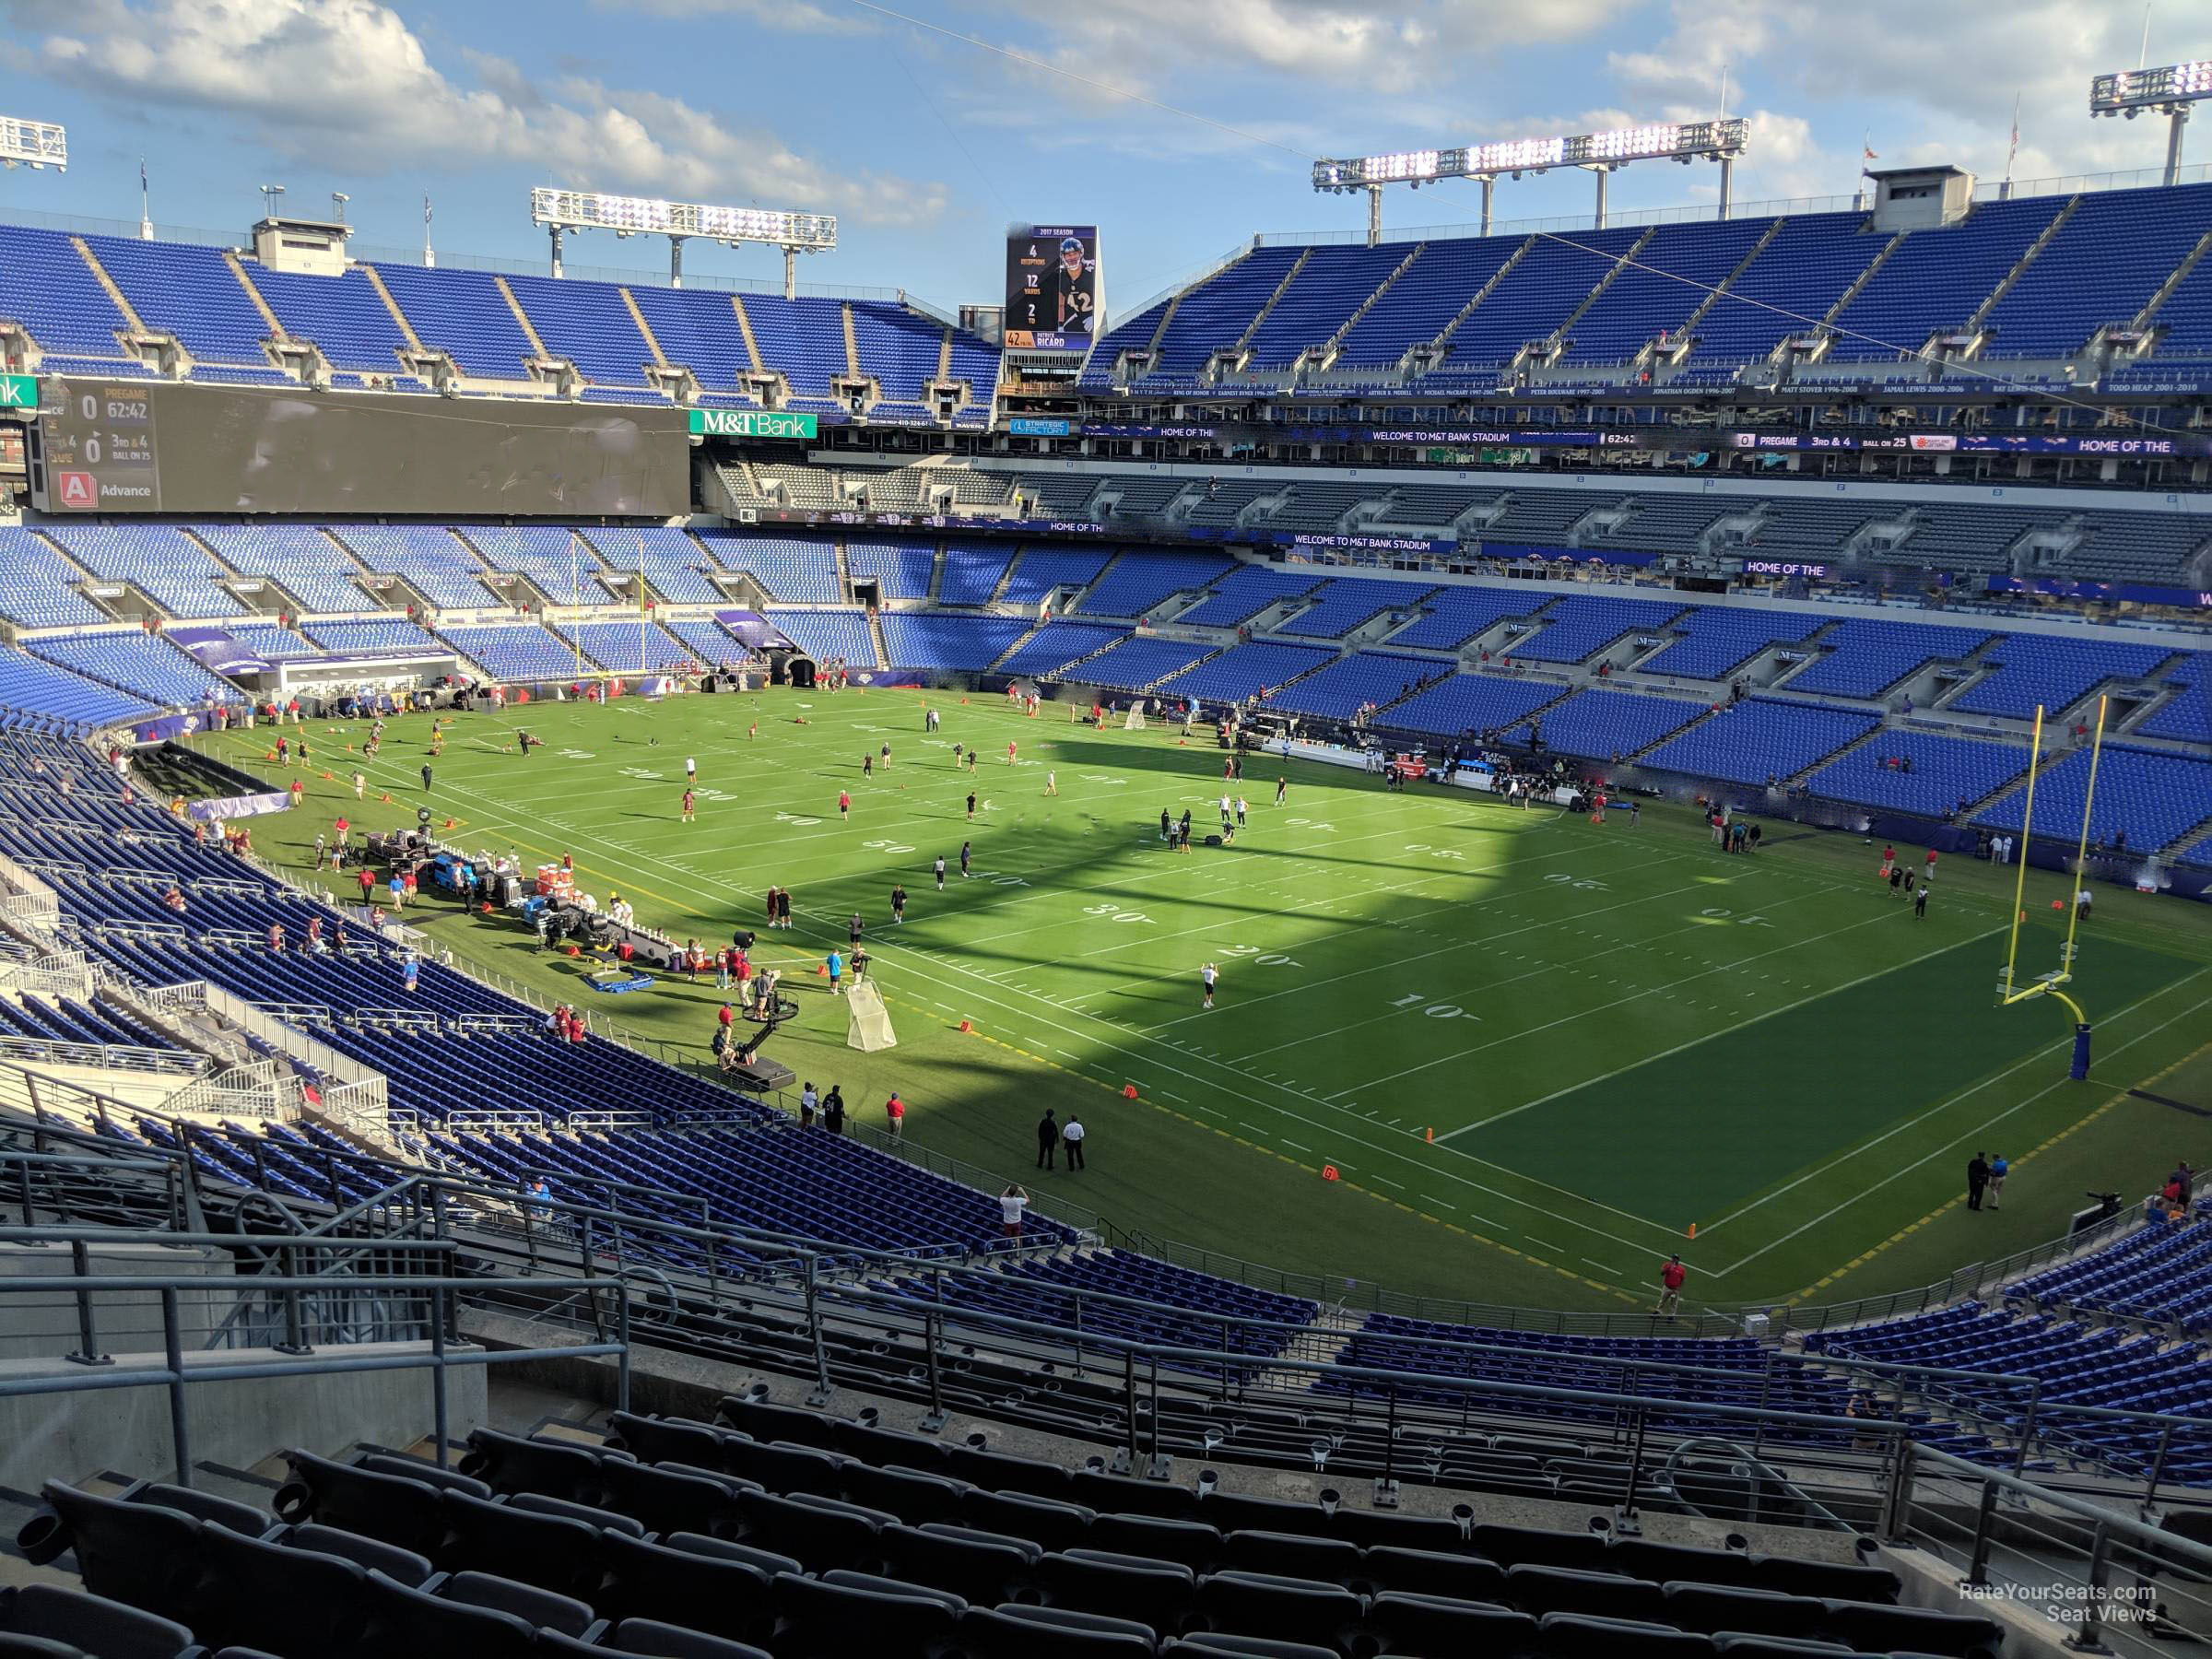 Section 247 at M&T Bank Stadium